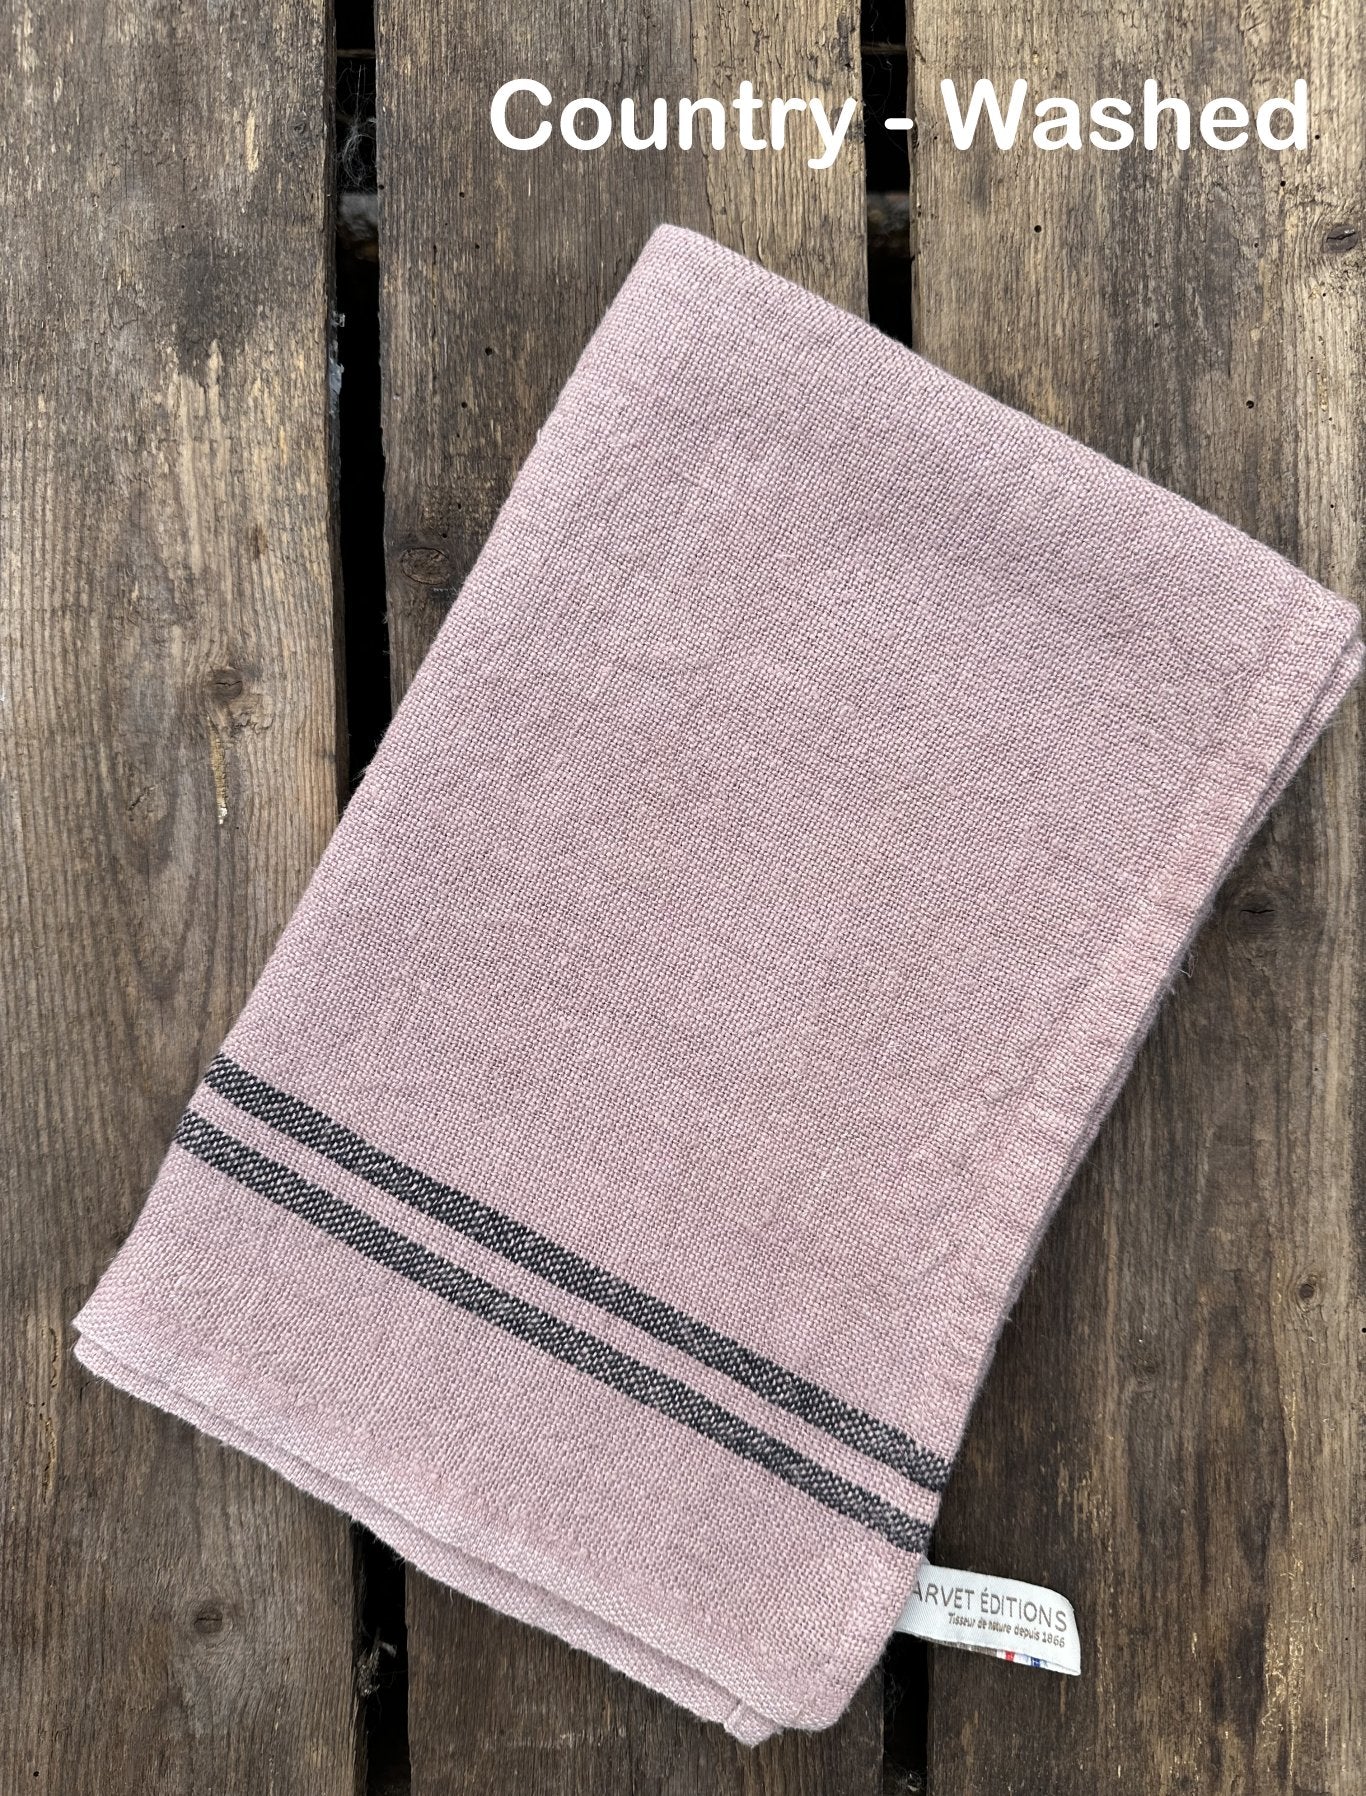 Charvet Editions "Country Washed & Dyed" (Rose The), Natural woven linen tea towel. Made in France.